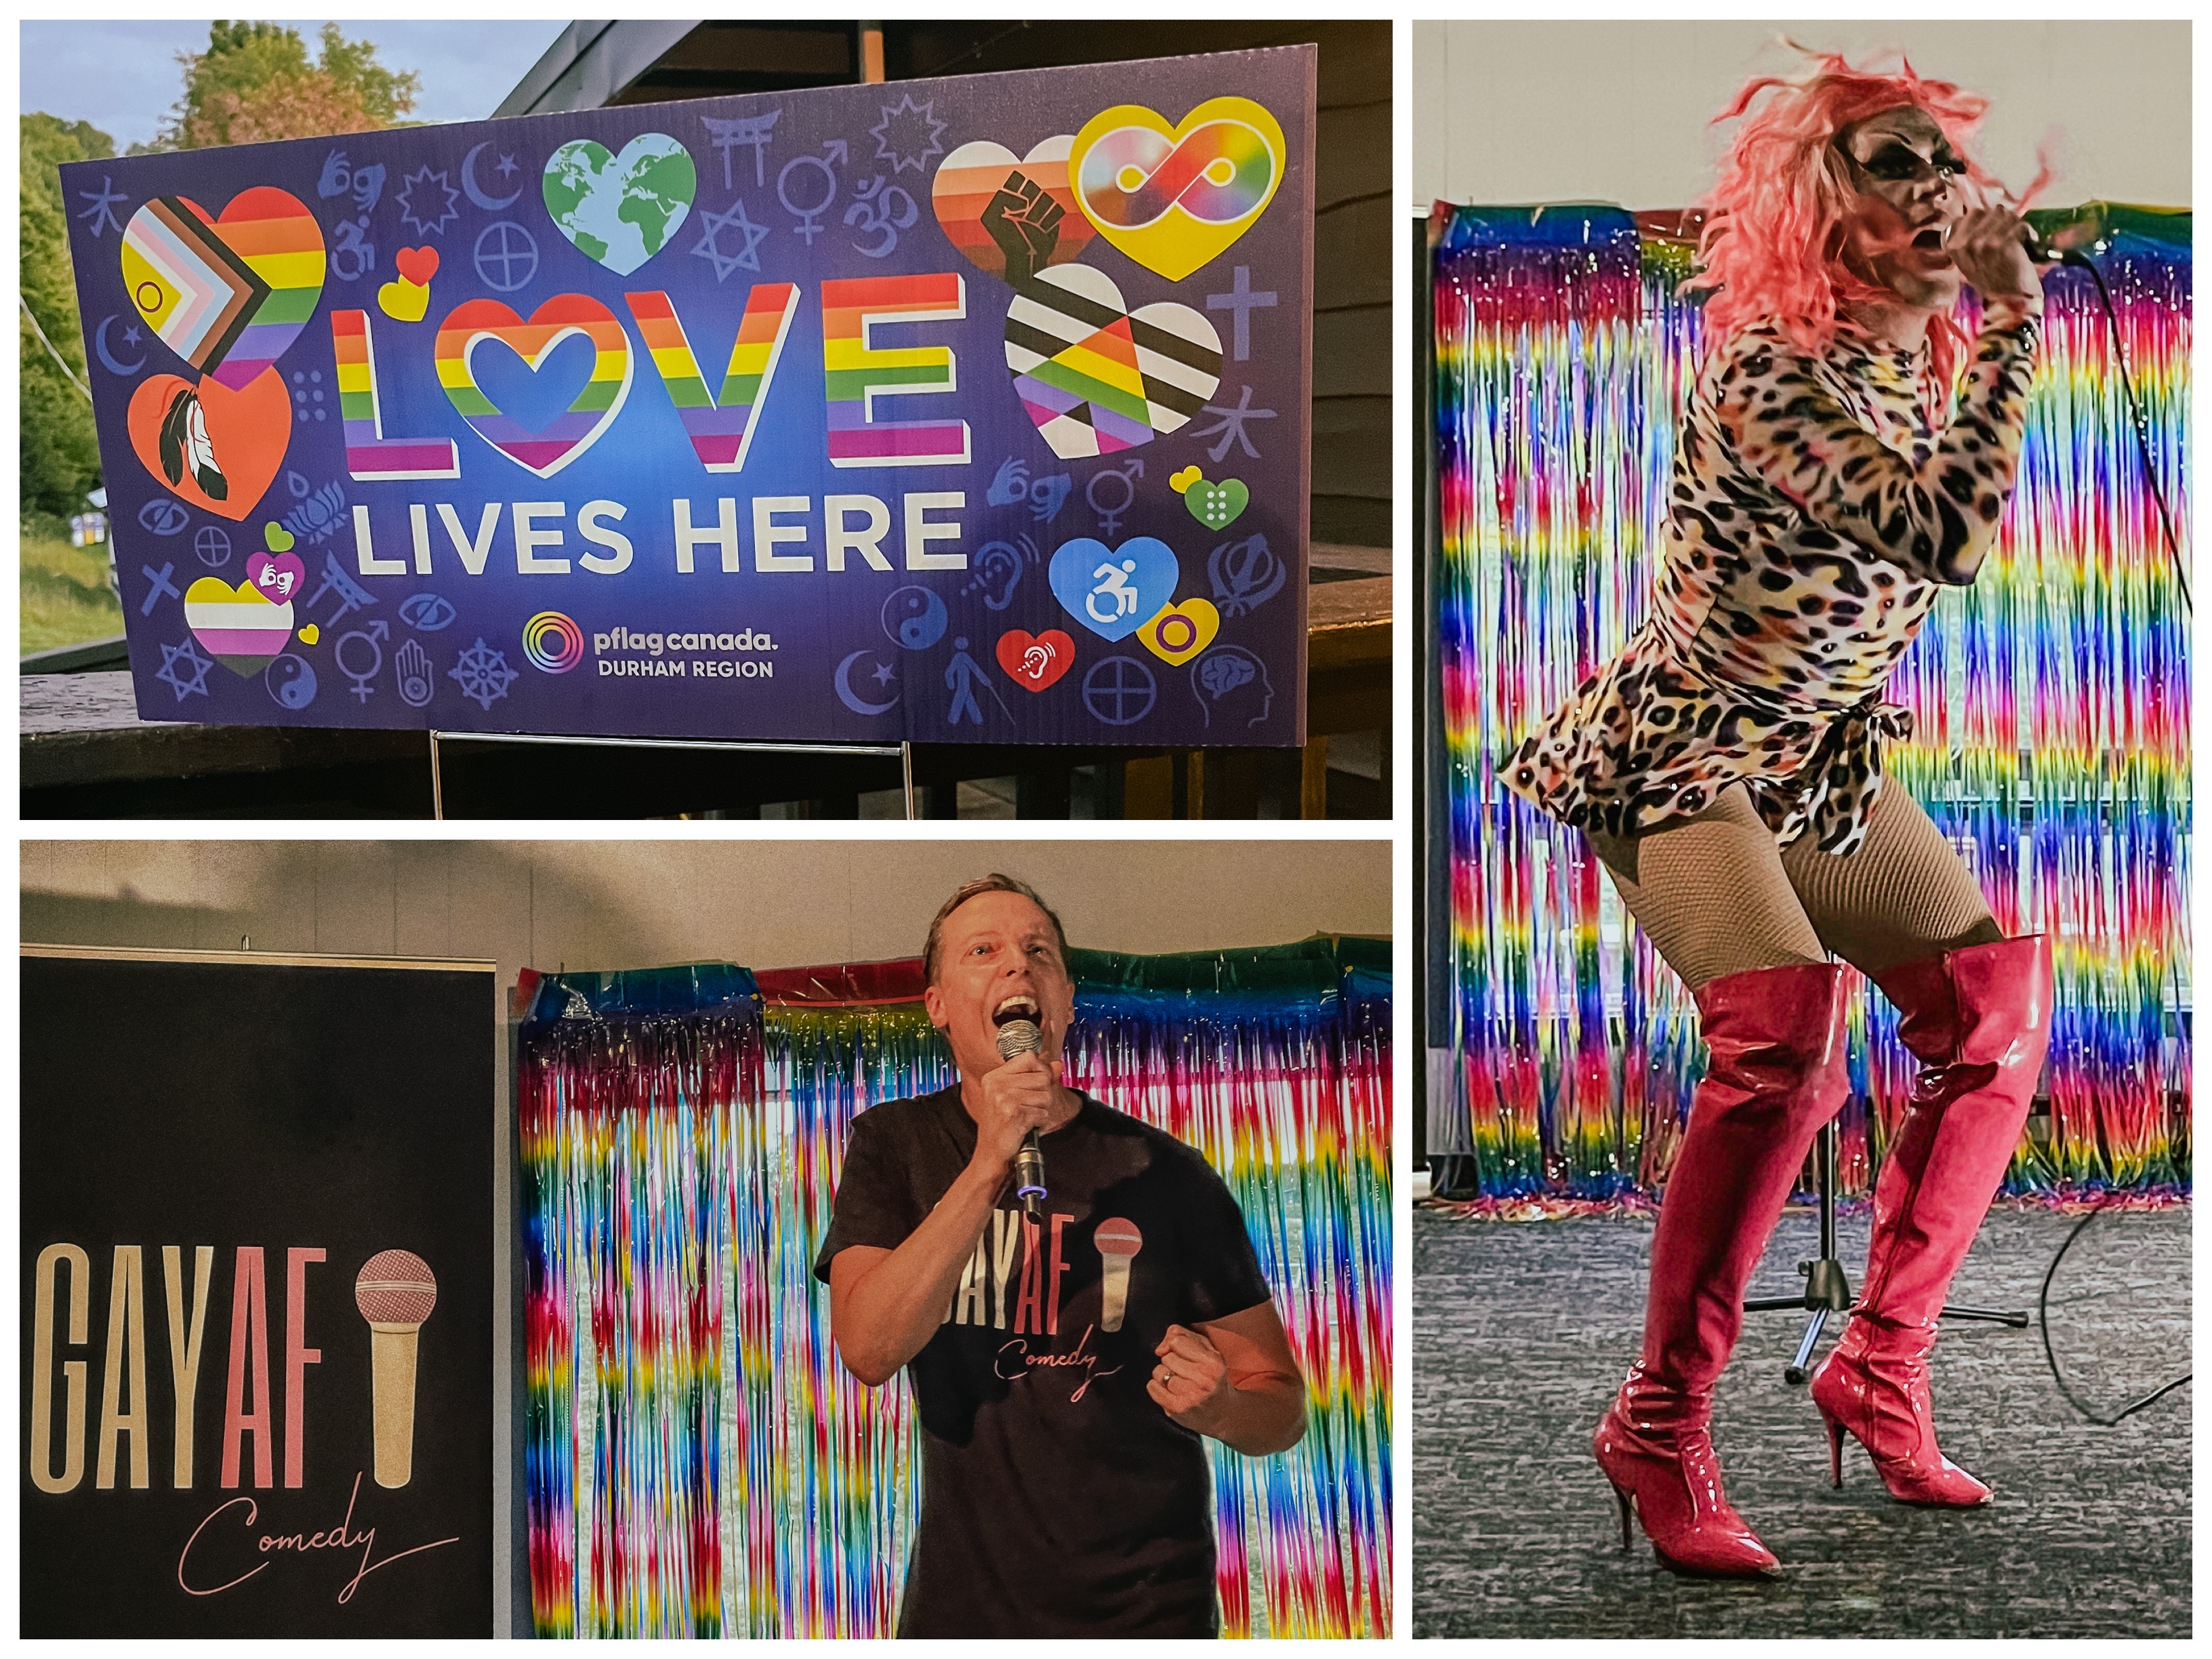 a collage of 3 photos from comedy night at Sir Sam's; a banner that shows rainbow hearts and says "love is here", a smiling comedian talking into a microphone, and a comedian with pink hair, wearing tall pink boots and a leopard print dress.